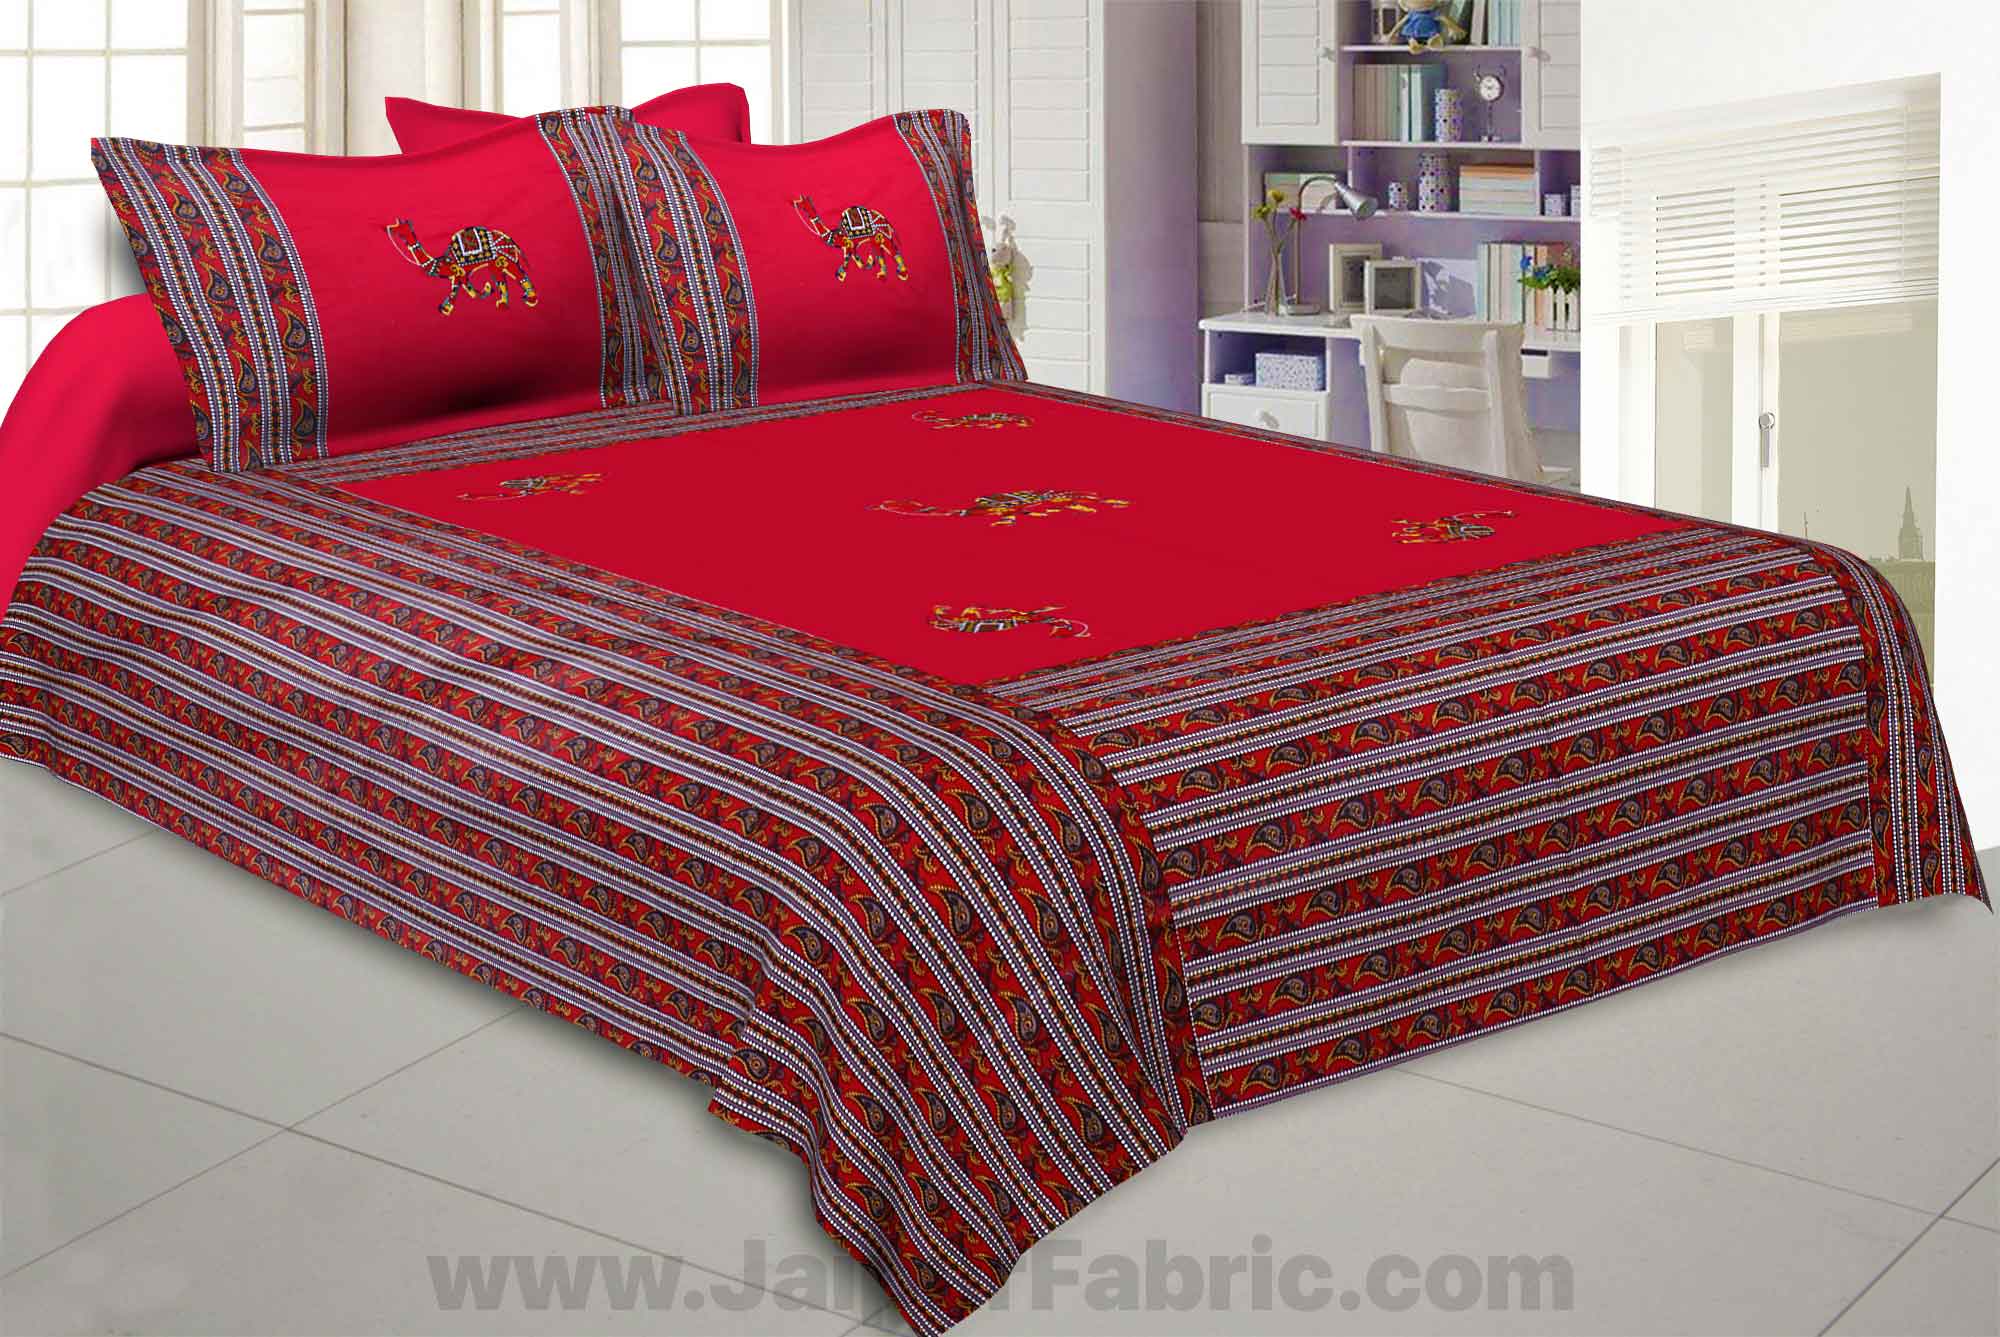 Applique Red Camel Jaipuri  Hand Made Embroidery Patch Work Double Bedsheet